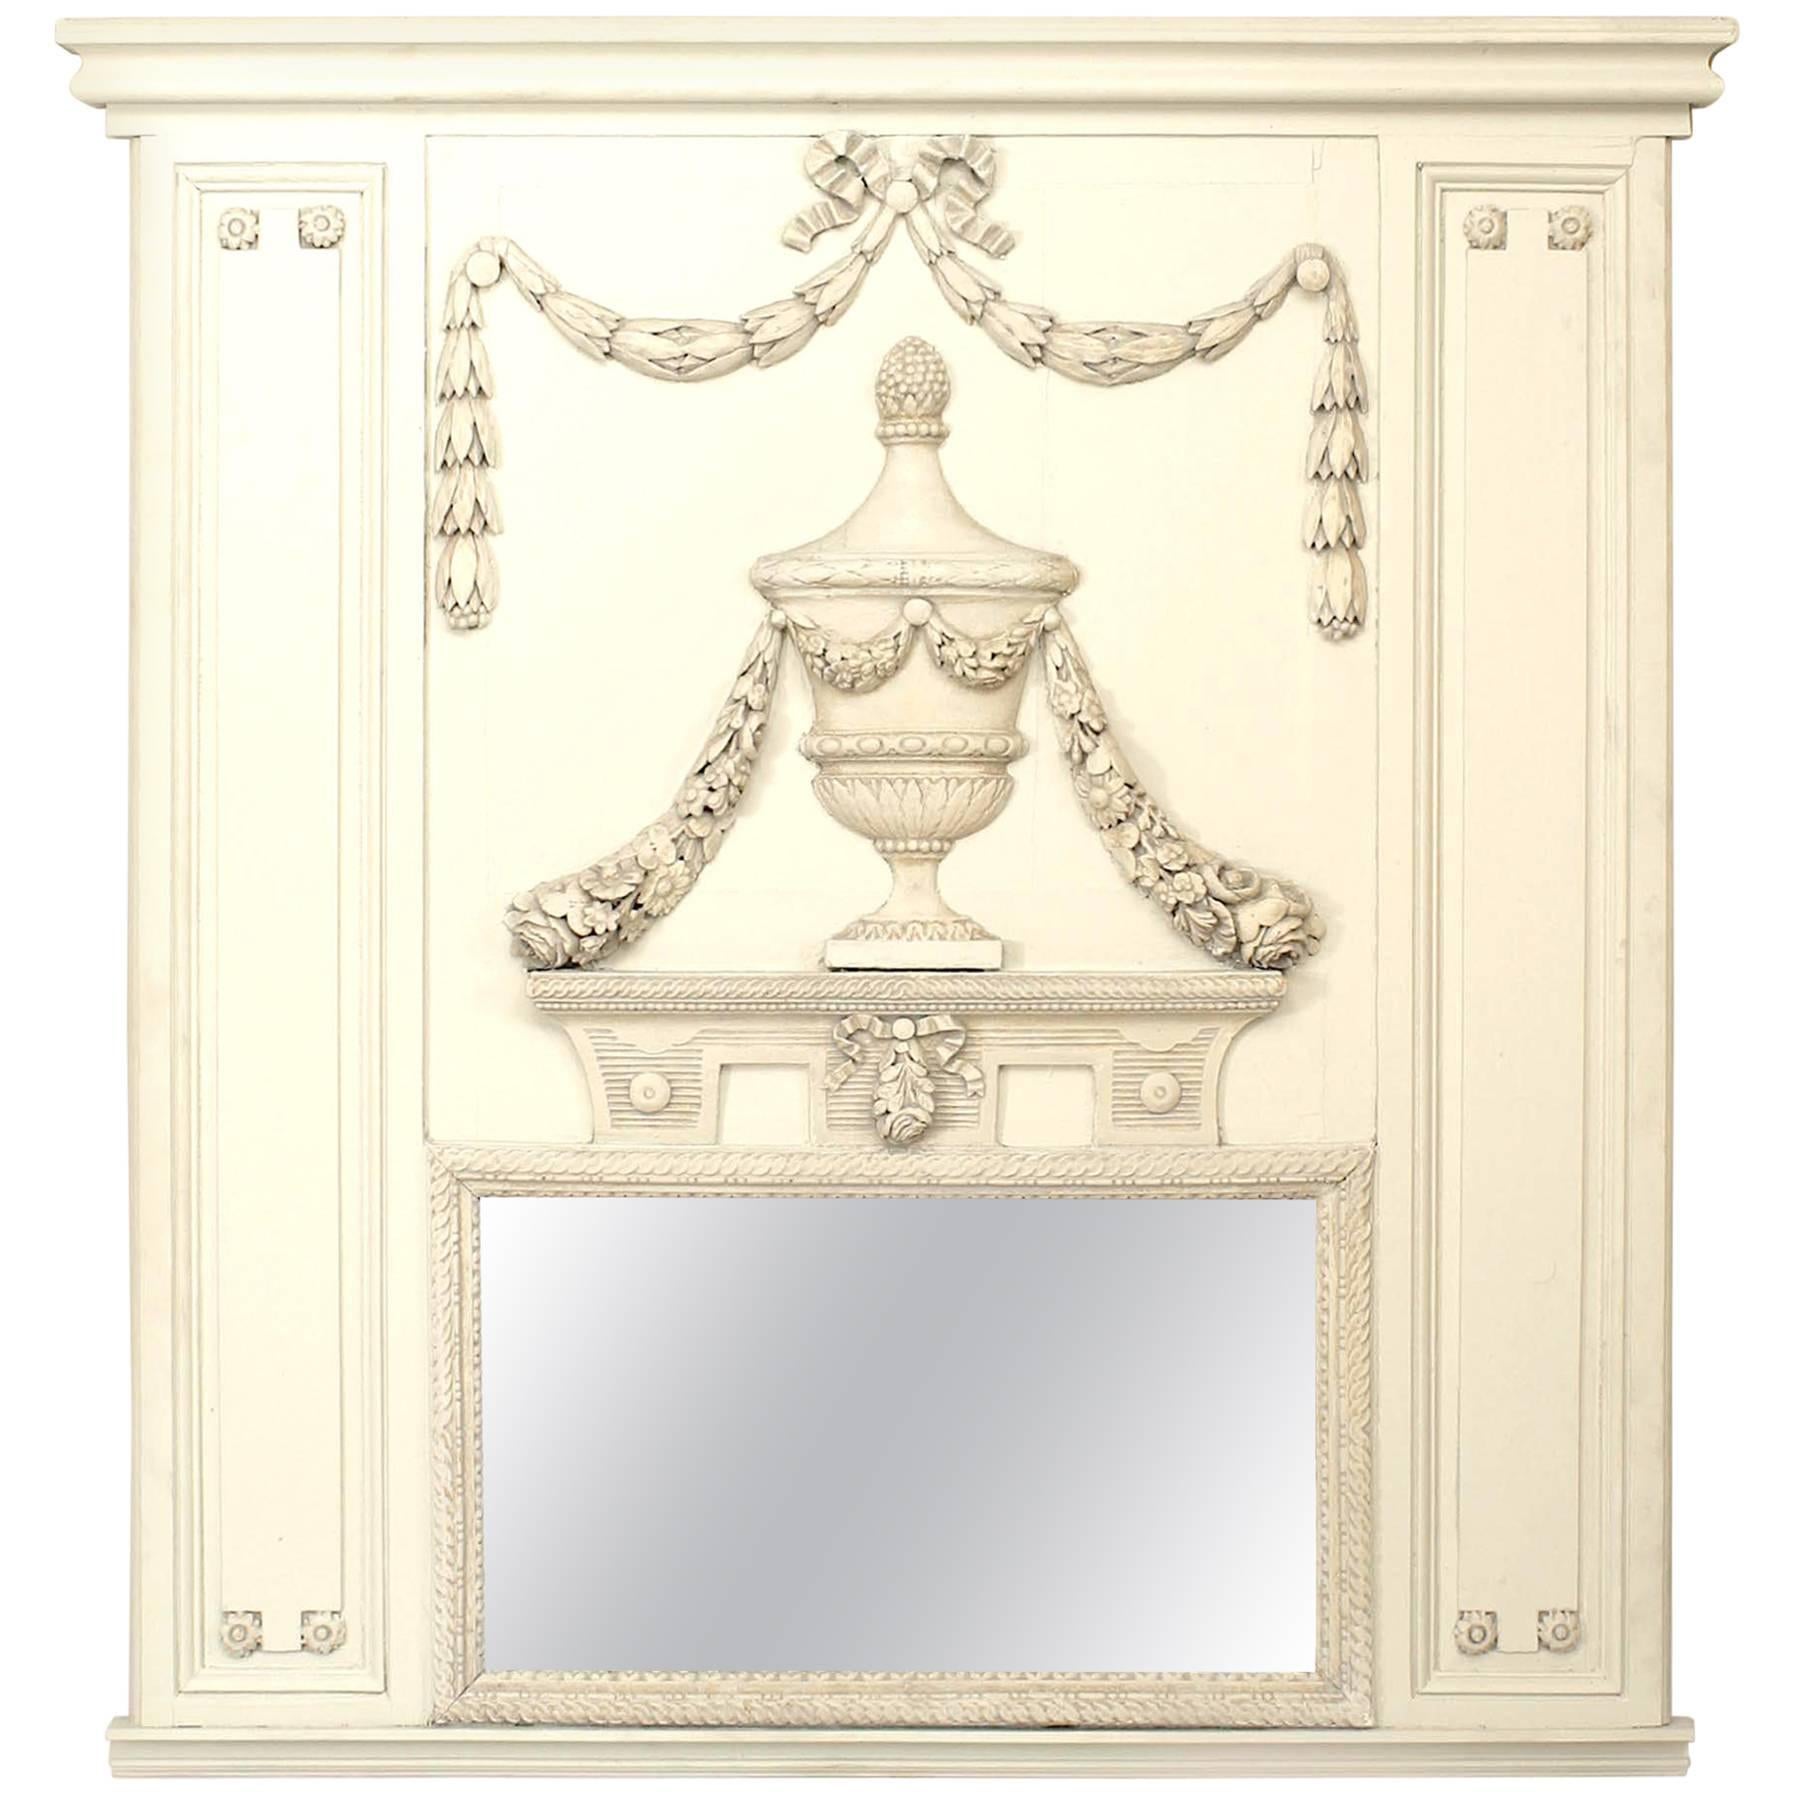 Louis XVI White Painted Urn and Festoon Design Trumeau / Wall Mirror For Sale